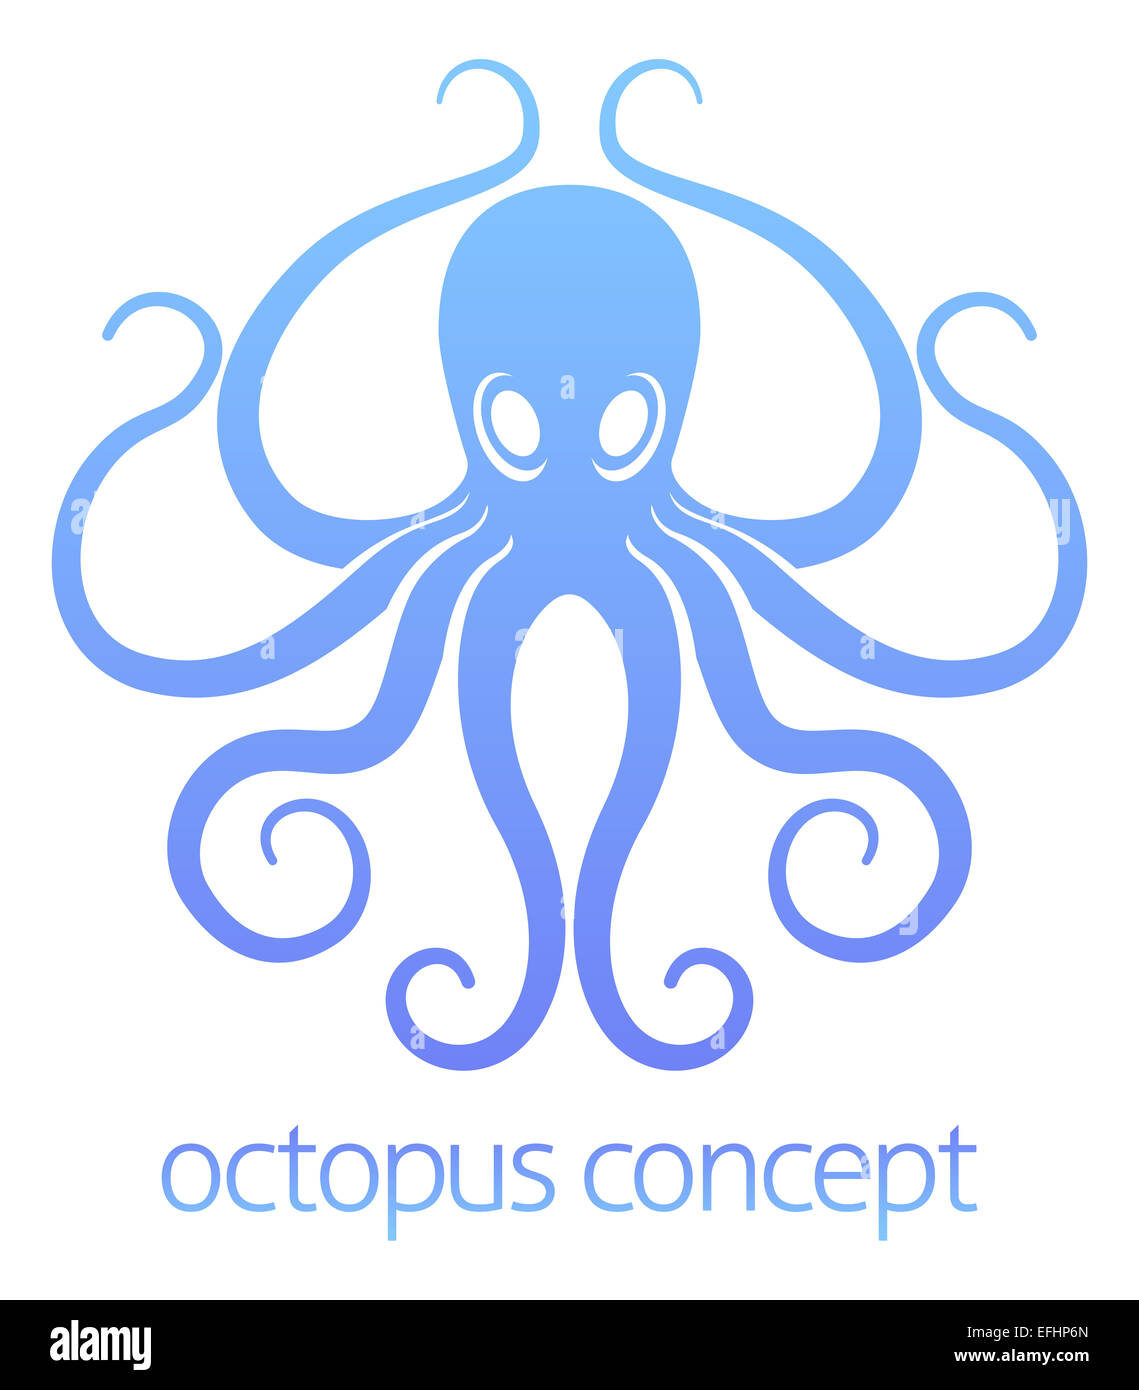 An abstract illustration of an octopus concept design Stock Photo